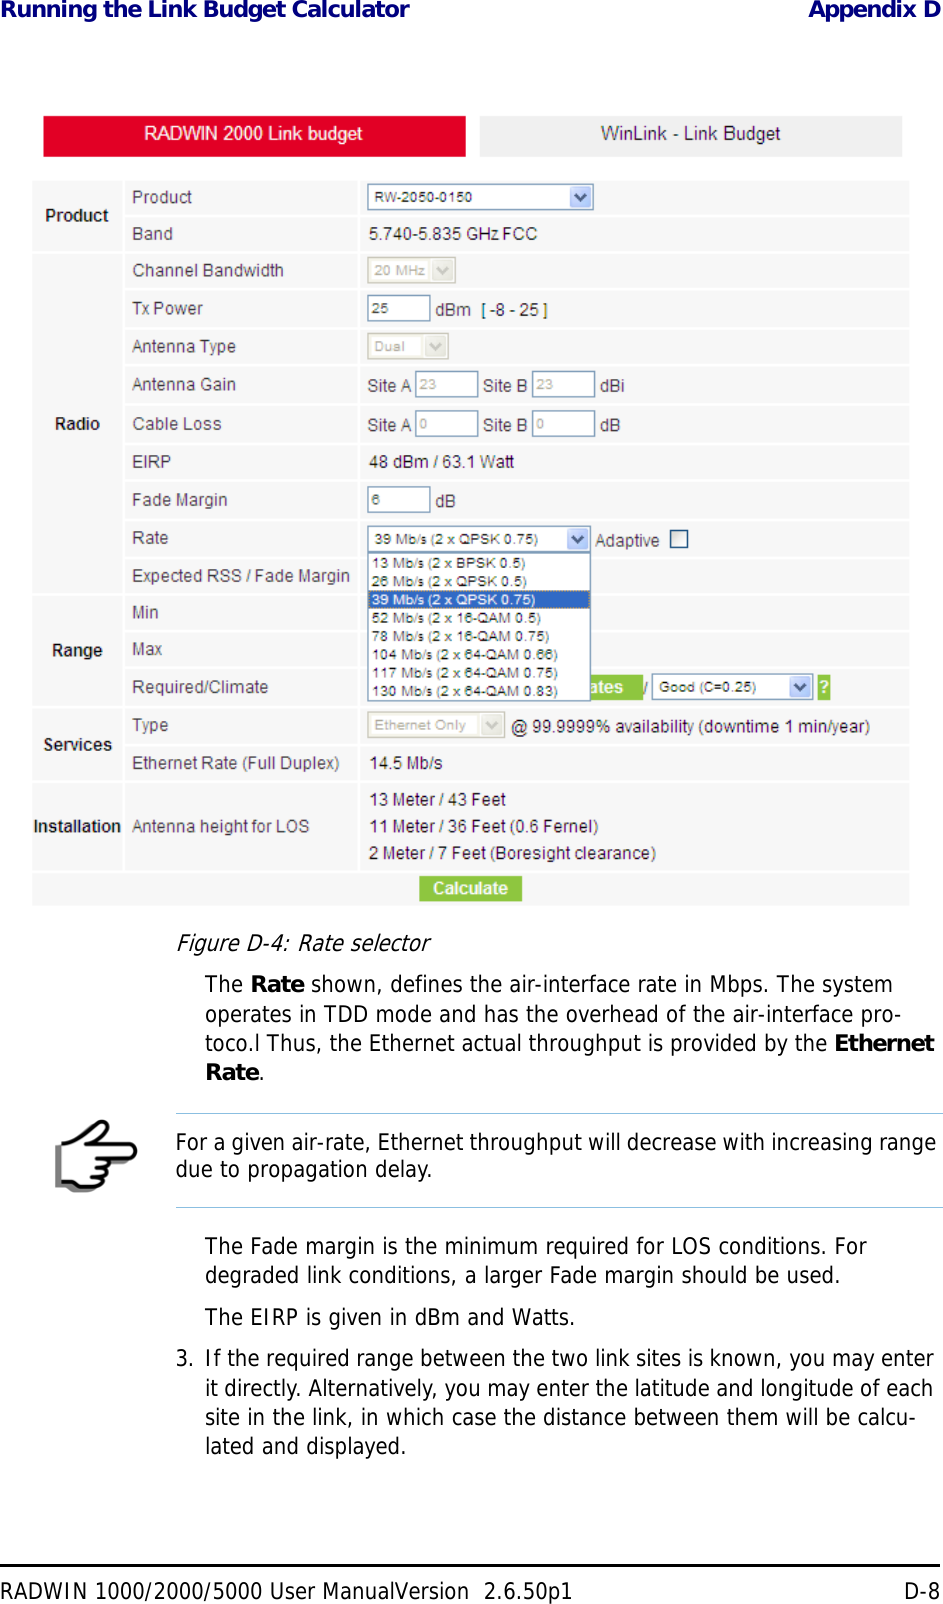 Running the Link Budget Calculator Appendix DRADWIN 1000/2000/5000 User ManualVersion  2.6.50p1 D-8Figure D-4: Rate selectorThe Rate shown, defines the air-interface rate in Mbps. The system operates in TDD mode and has the overhead of the air-interface pro-toco.l Thus, the Ethernet actual throughput is provided by the Ethernet Rate.The Fade margin is the minimum required for LOS conditions. For degraded link conditions, a larger Fade margin should be used.The EIRP is given in dBm and Watts.3. If the required range between the two link sites is known, you may enter it directly. Alternatively, you may enter the latitude and longitude of each site in the link, in which case the distance between them will be calcu-lated and displayed.NoteFor a given air-rate, Ethernet throughput will decrease with increasing range due to propagation delay.